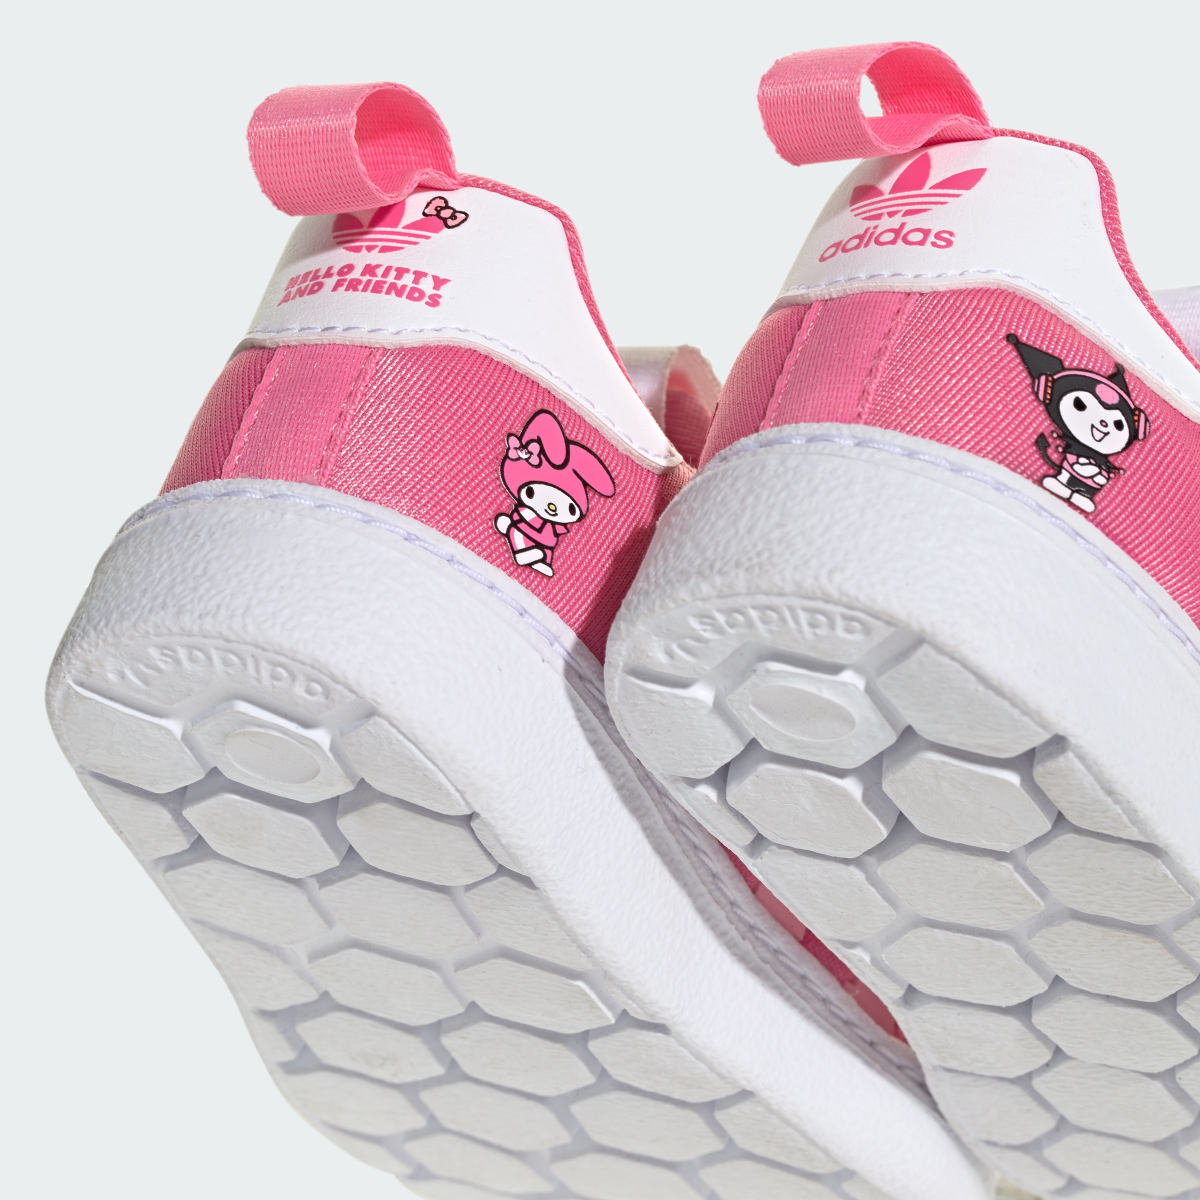 Adidas Originals x Hello Kitty and Friends Superstar 360 Shoes Kids. 9